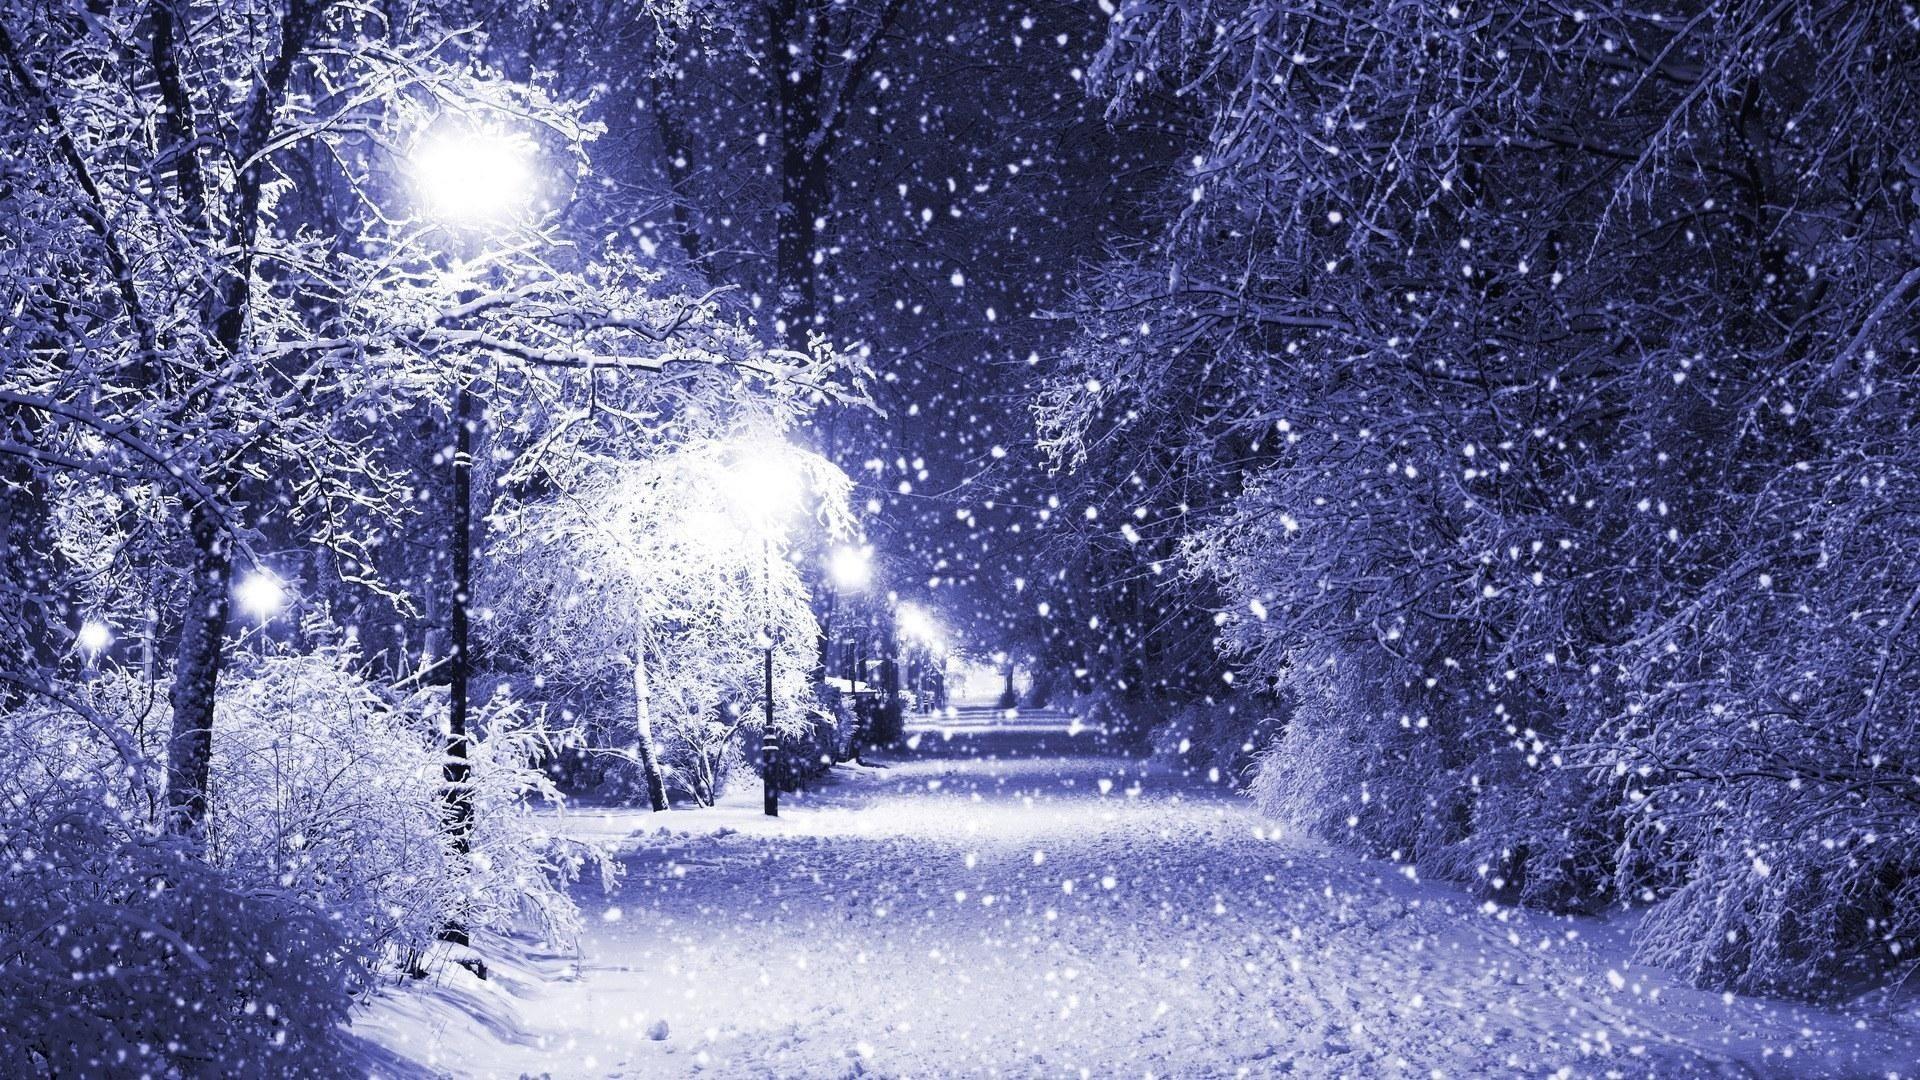 Wallpaper For > Snowy Night Background